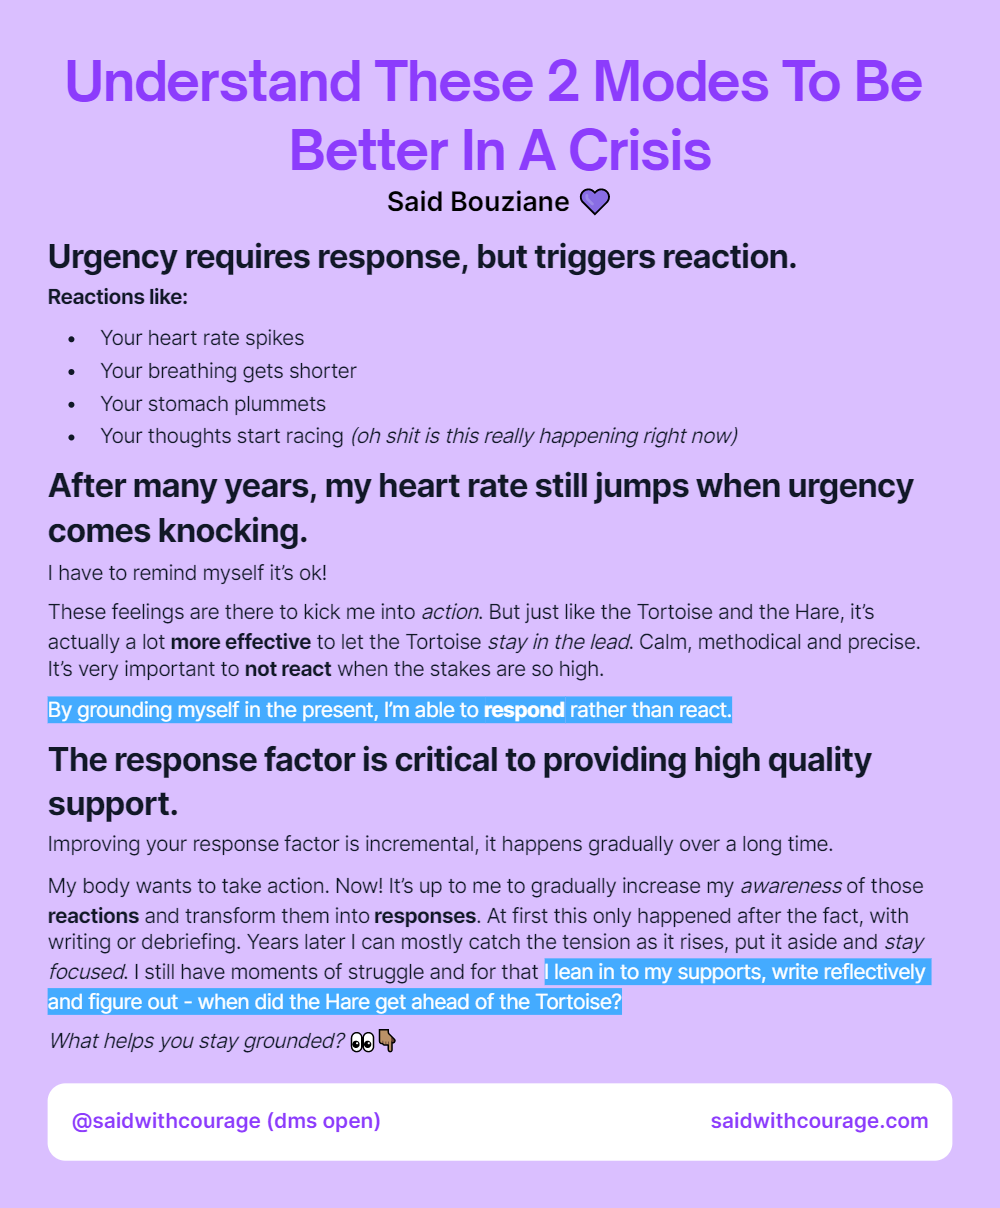 Understand These 2 Modes To Be Better In A Crisis